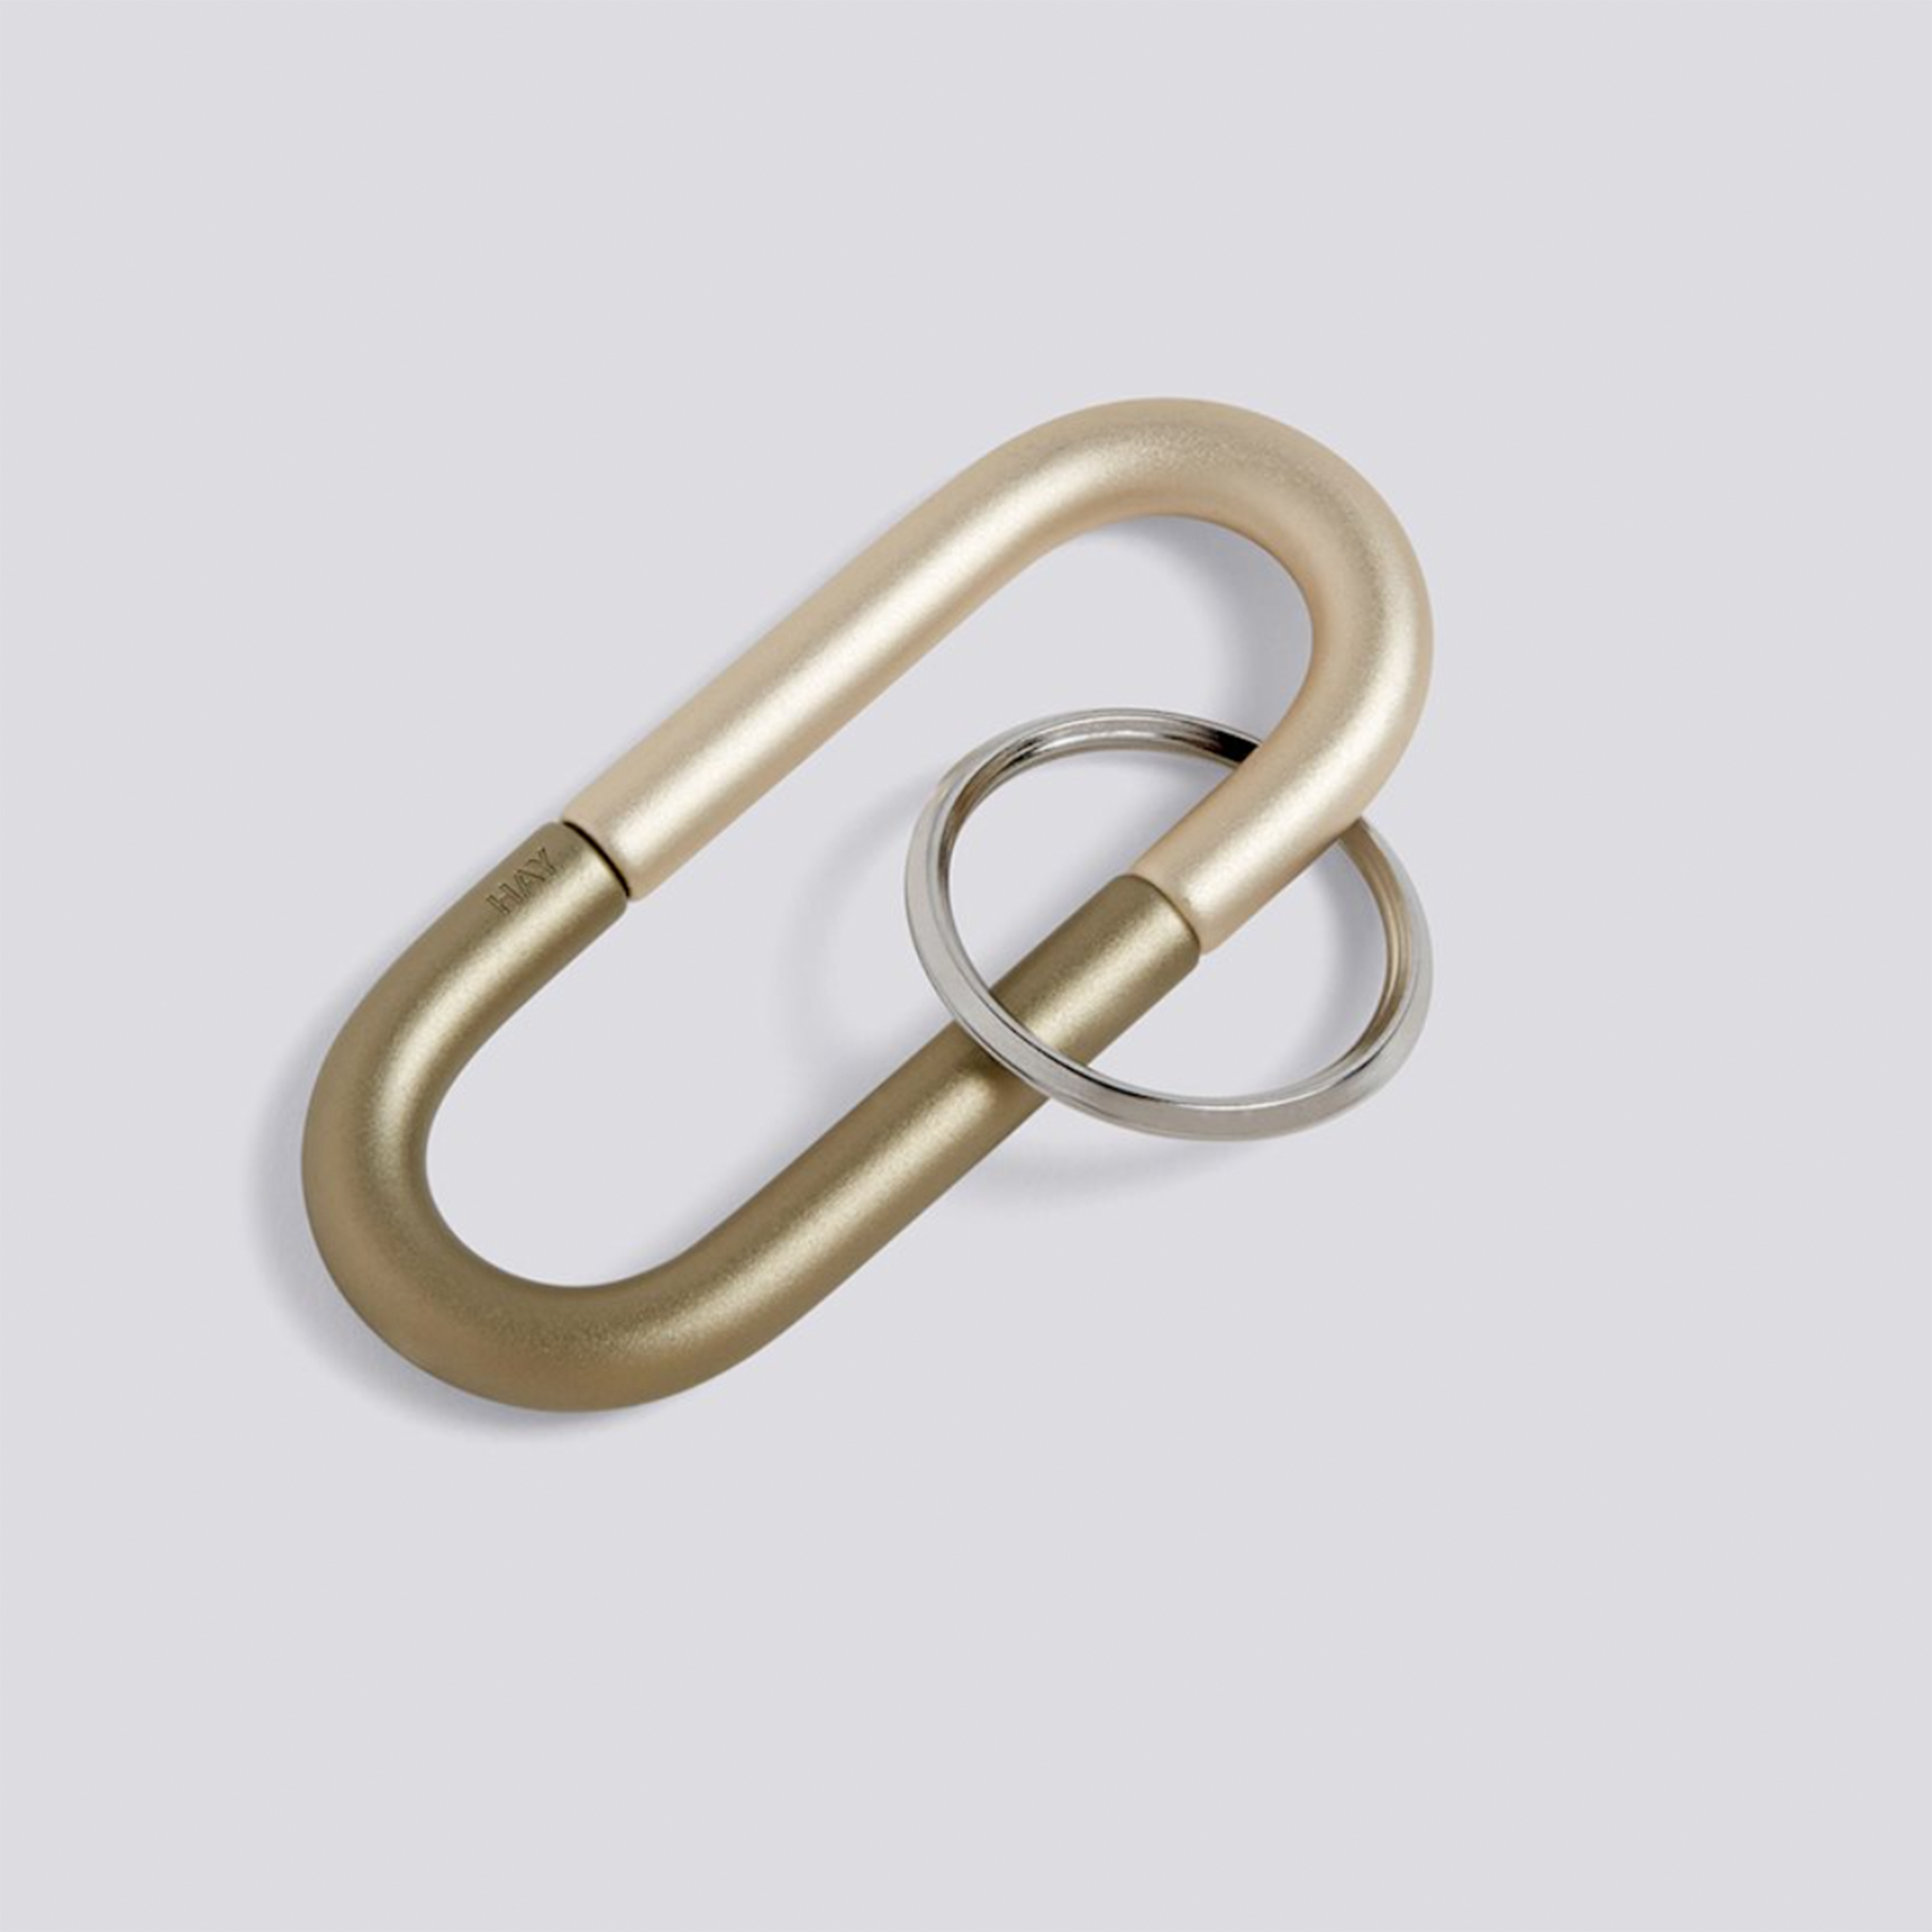 Cane Key Ring by Hay